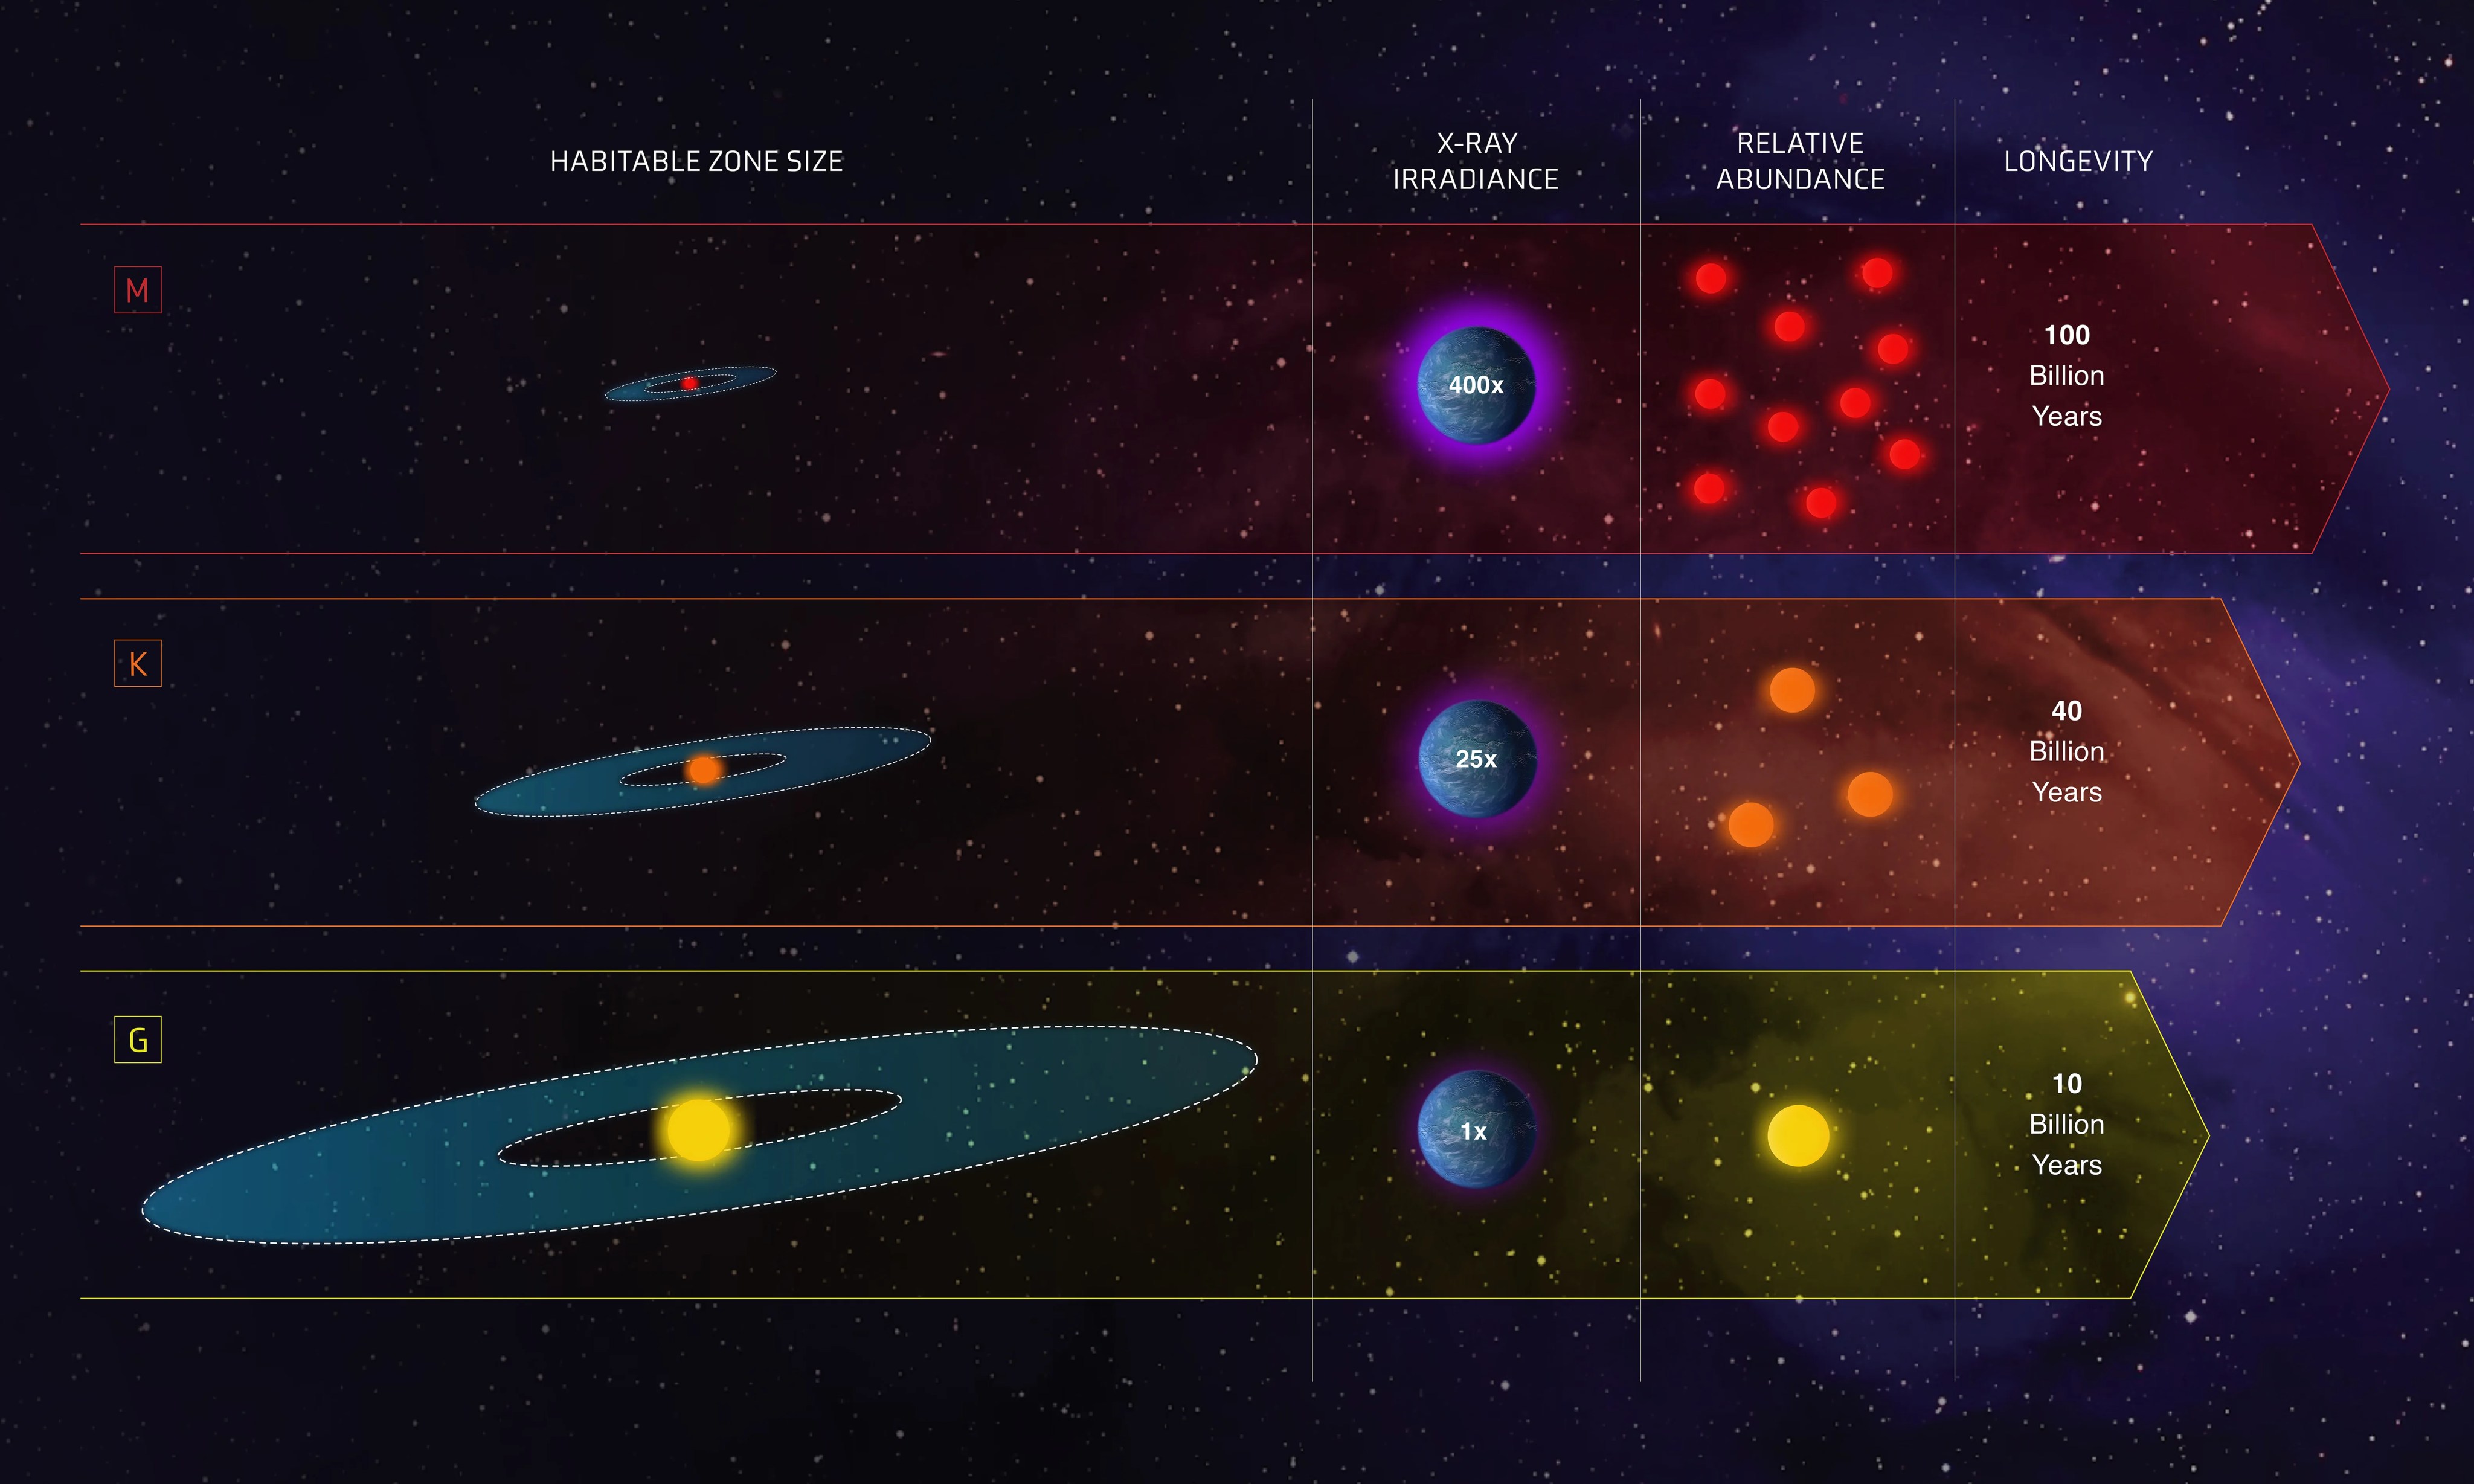 comparison of three star types and the sizes of their habitable zones